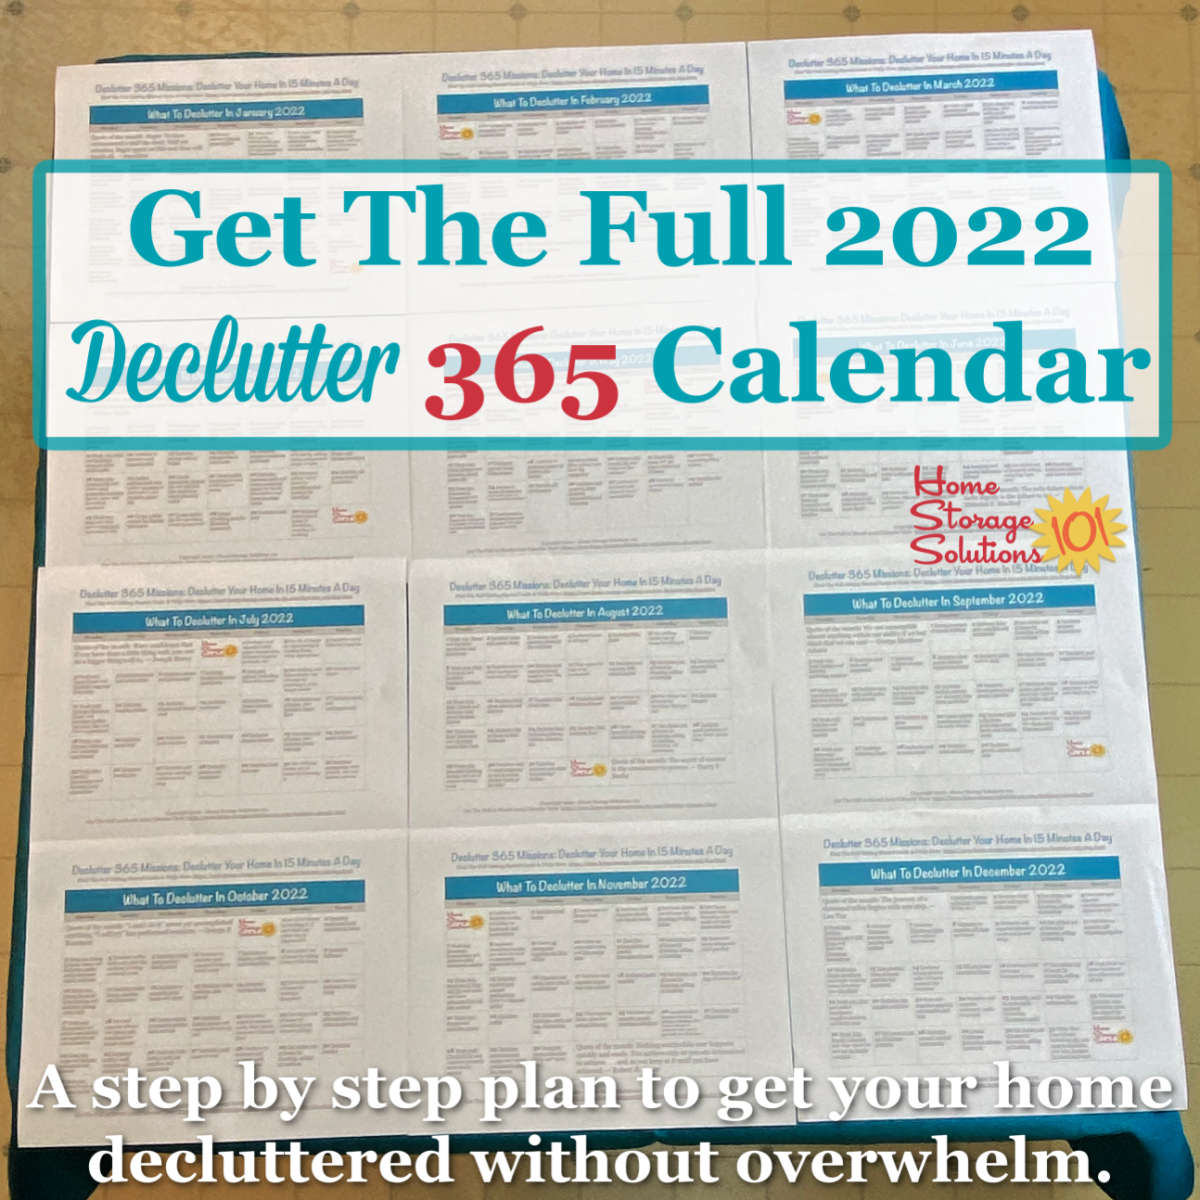 Get the full 2022 Declutter 365 calendar, a step by step plan to get your home decluttered without overwhelm {on Home Storage Solutions 101} #Declutter365 #DeclutteringHome #DeclutterTips